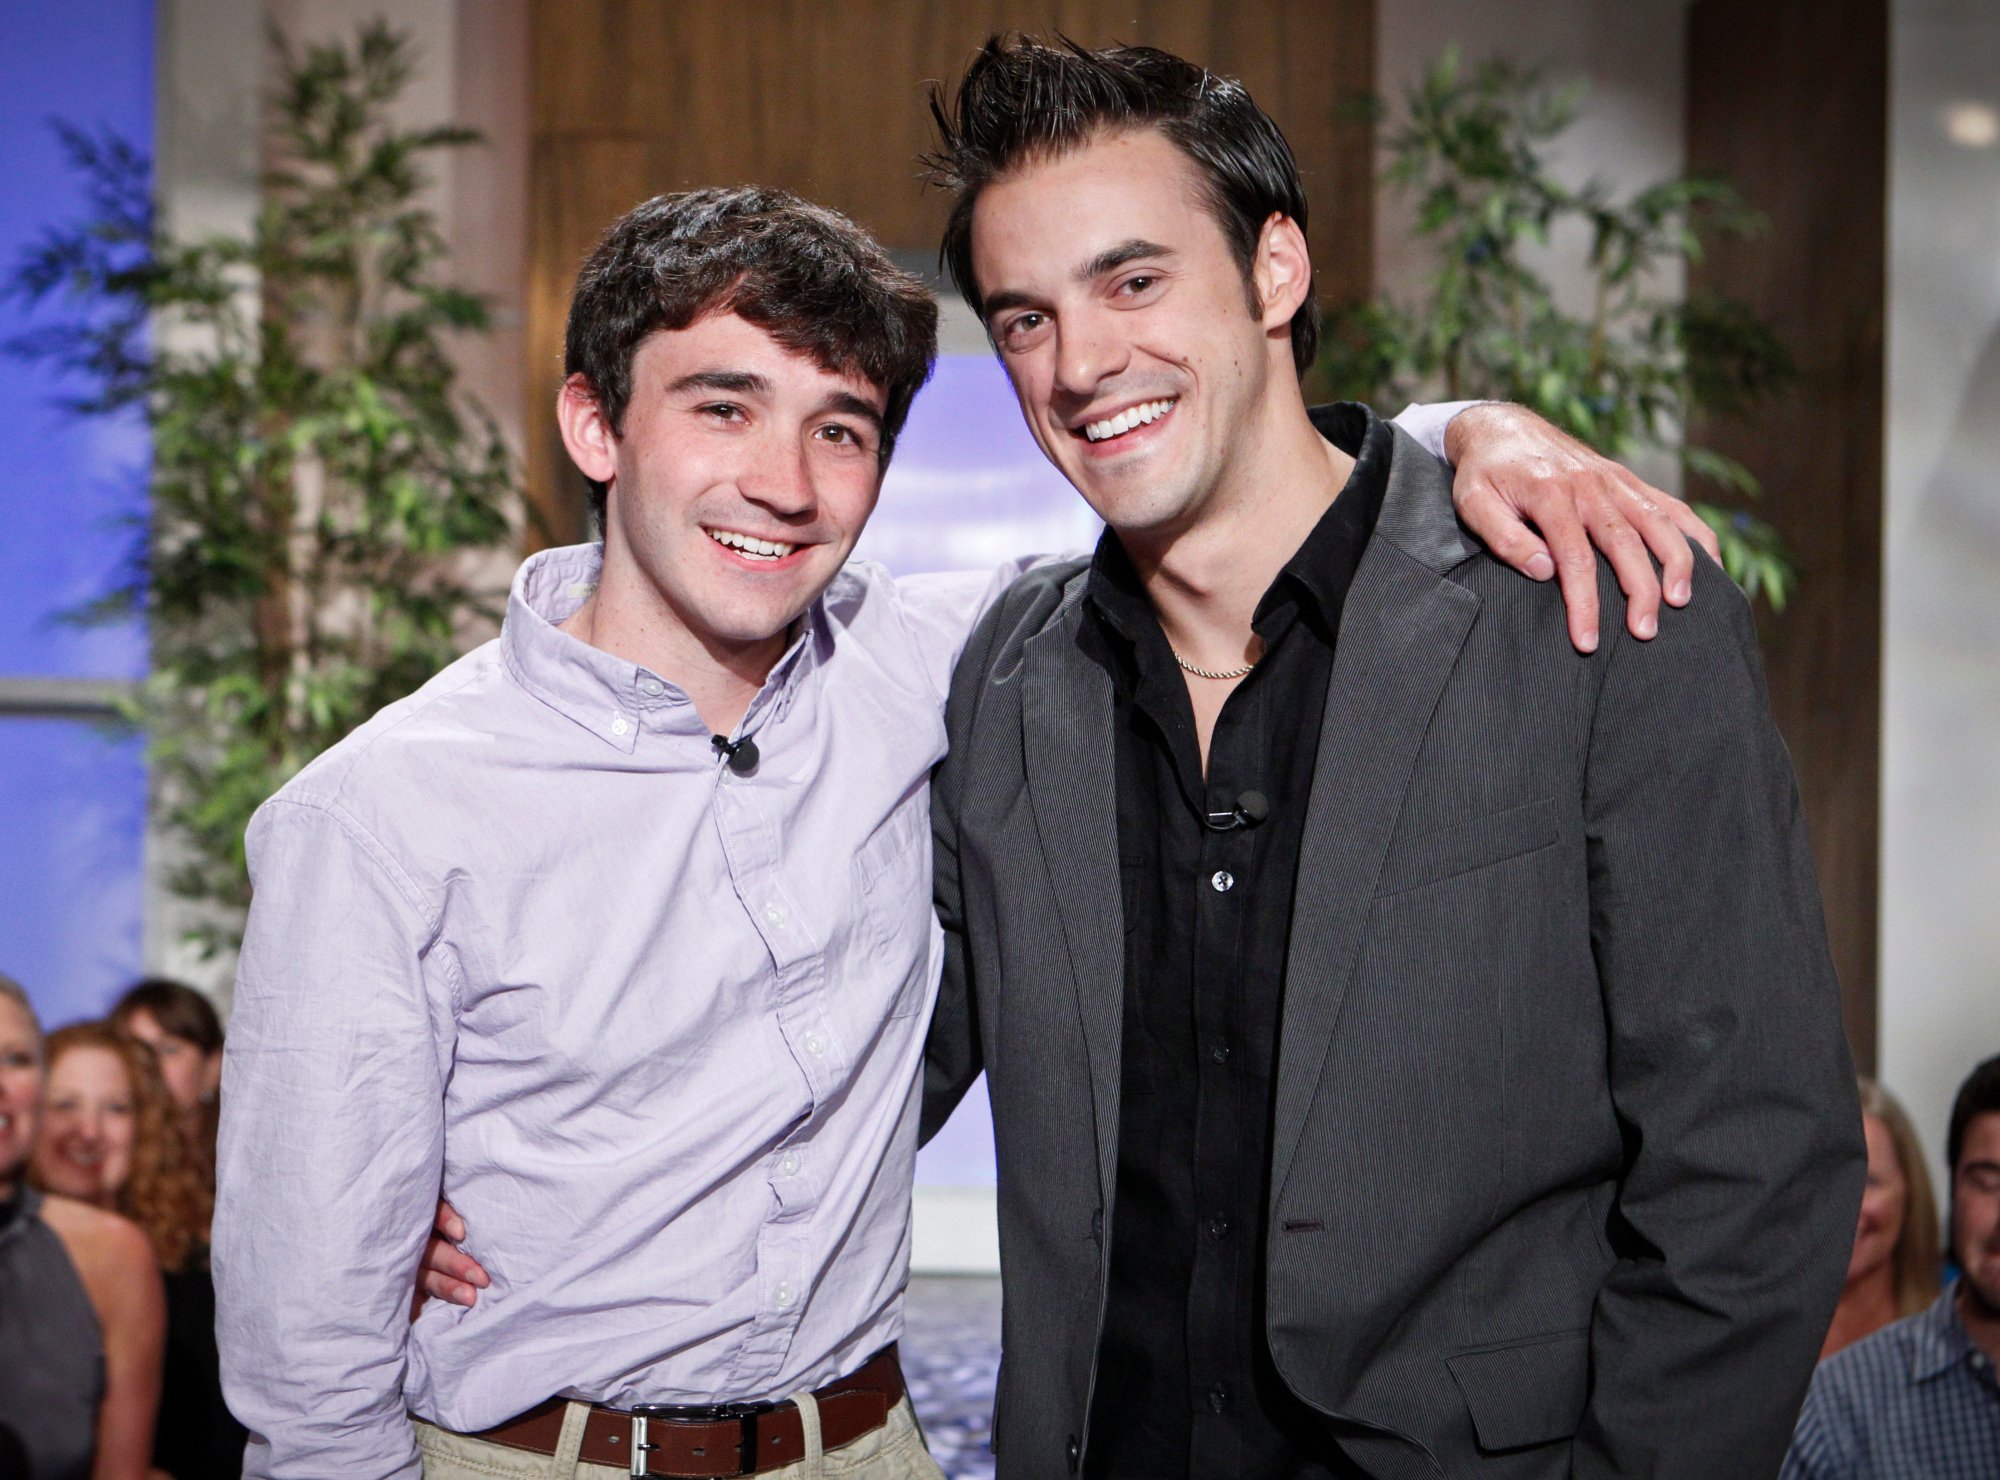 Ian Terry and Dan Gheesling, who played together on 'Big Brother' Season 14, pose for a picture together. Ian wears a light blue button-up shirt. Dan wears a gray suit over a black button-up shirt.